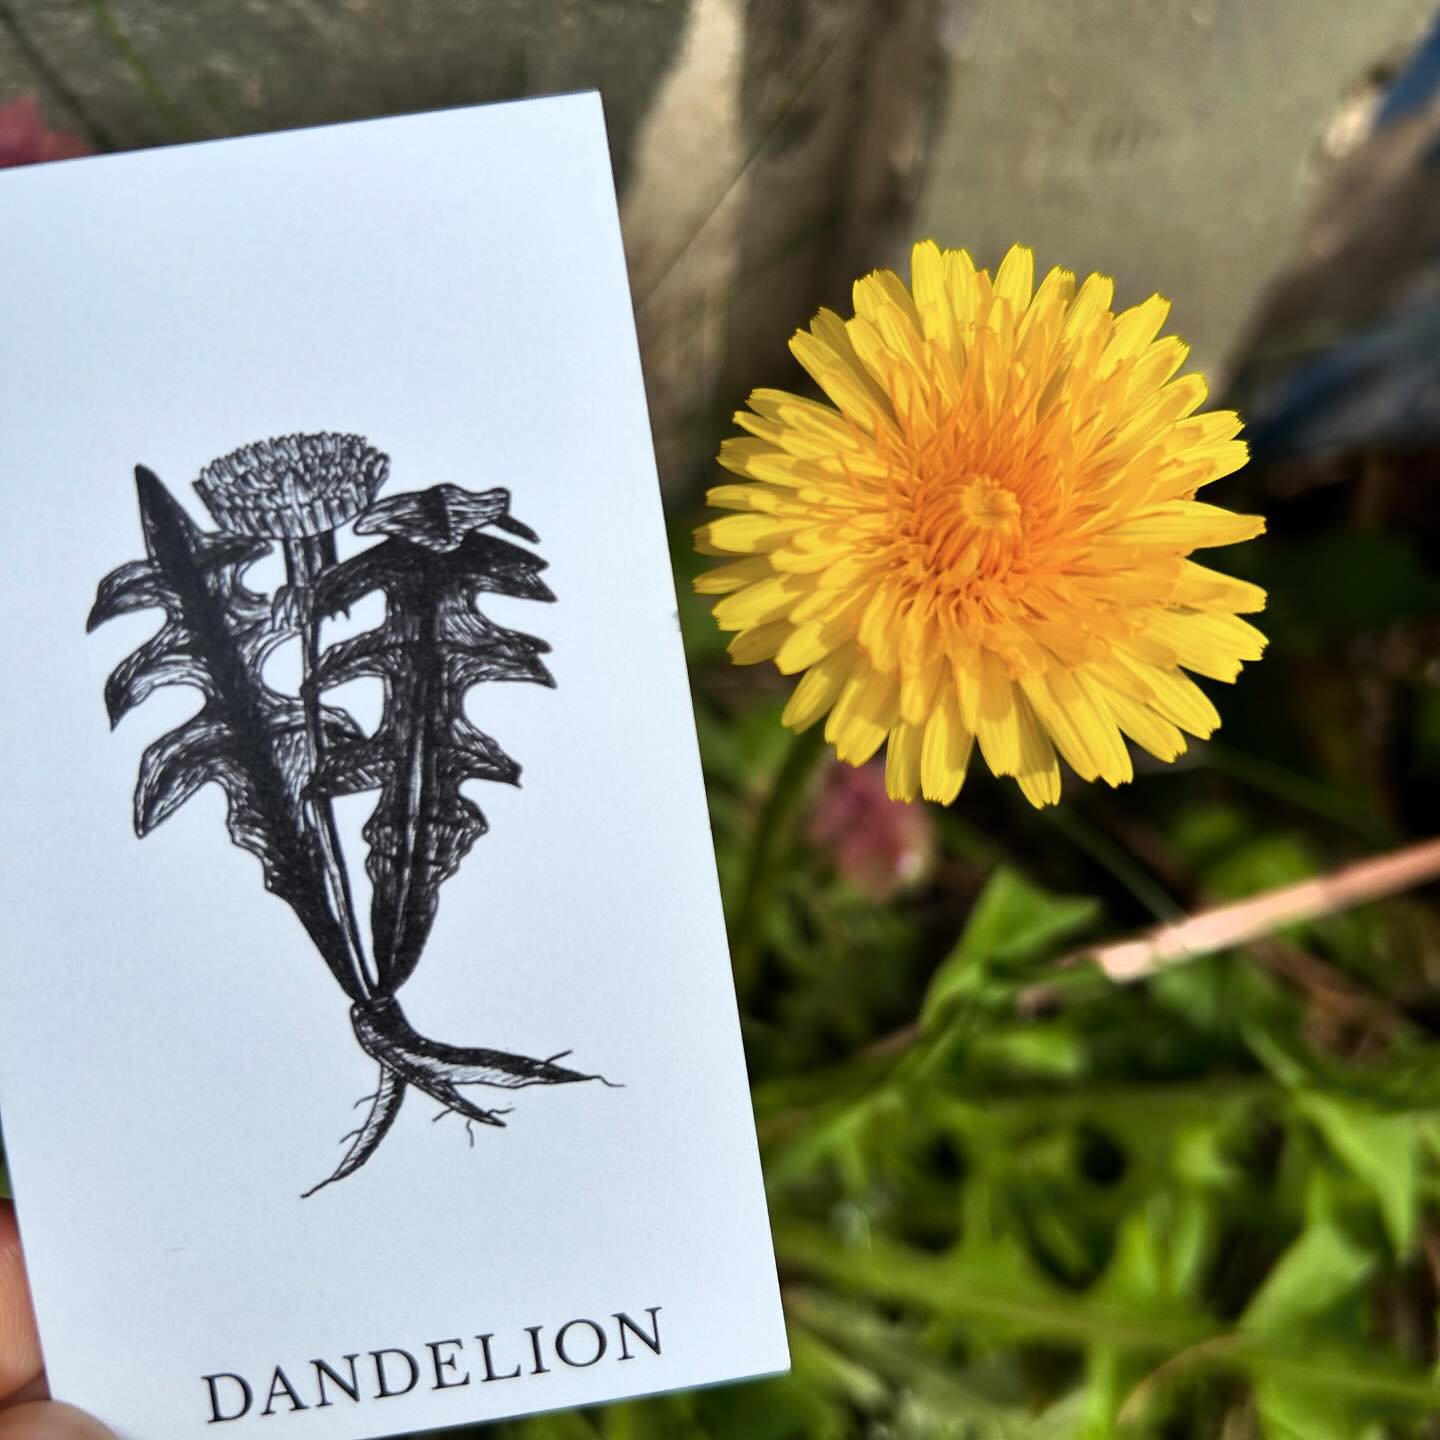 Dandelion has been catching my attention as I walk through my neighborhood. Dandelion is another plant ally - like my winter love, Cedar - that evokes resilience (fortitude and flexibility). Hmmm&hellip; 😊 I love the way nature communicates!

I love